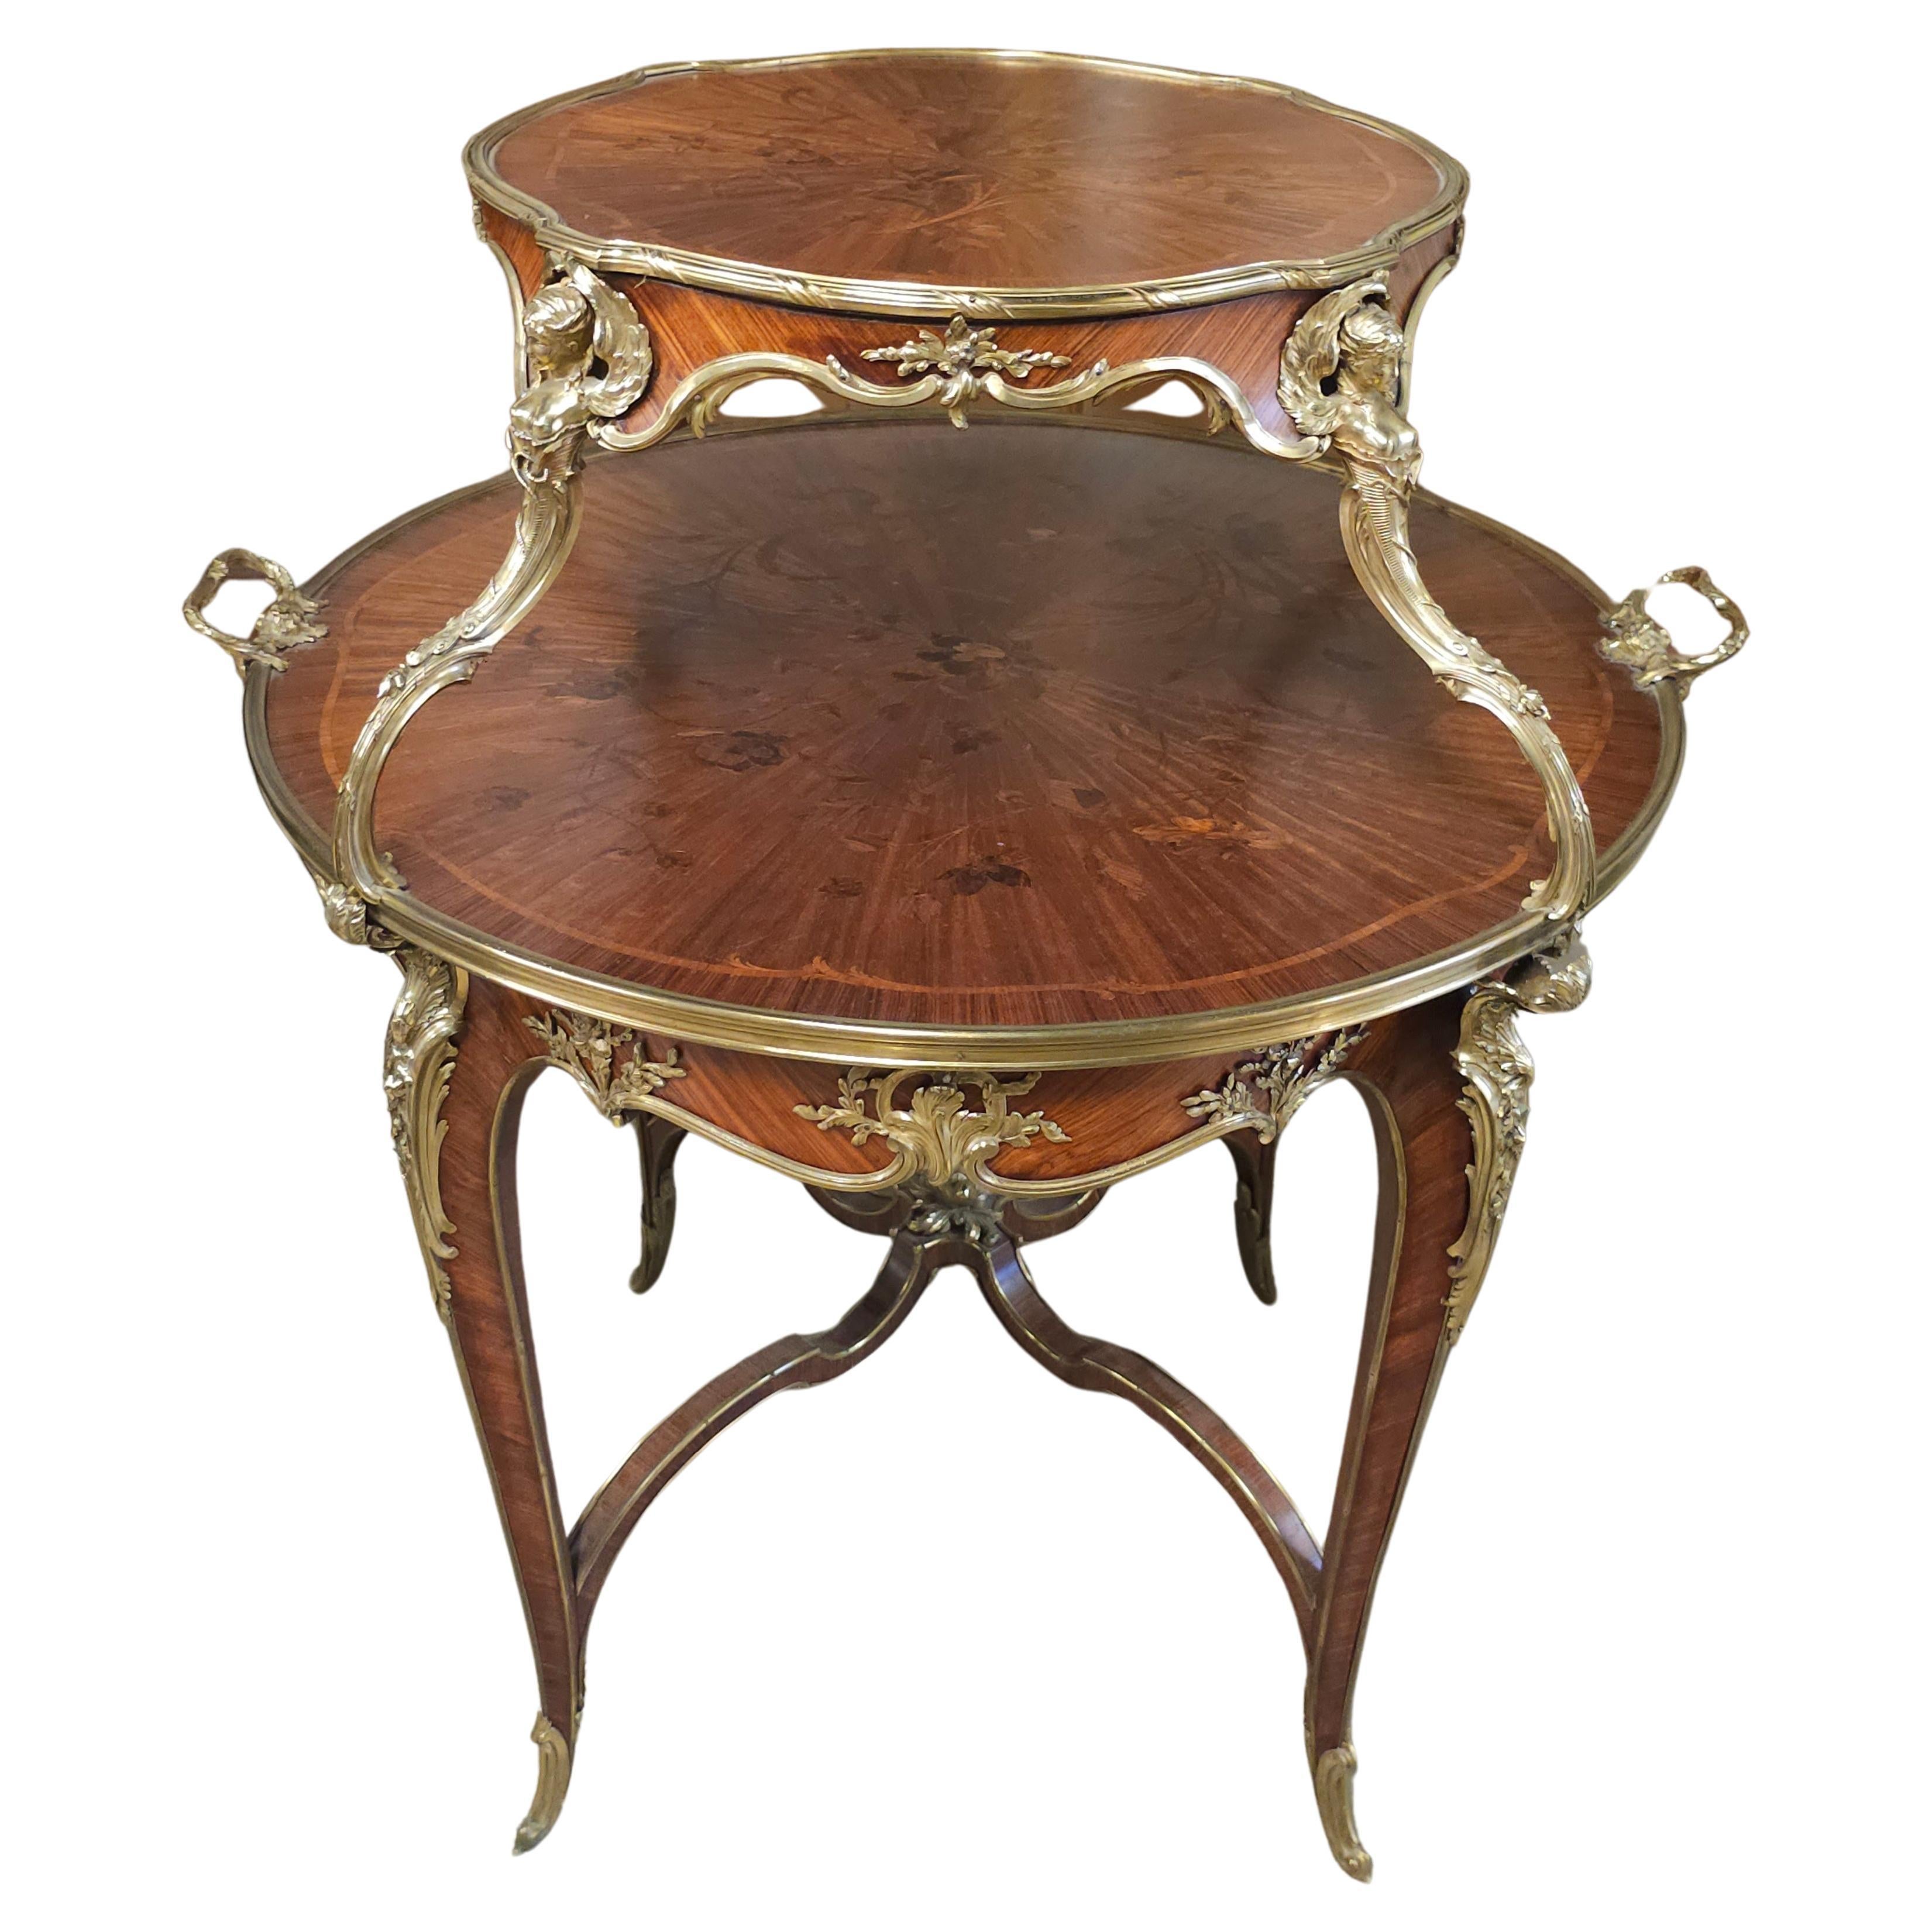 A FRENCH ORMOLU-MOUNTED KINGWOOD, SATINE AND BOIS DE BOUT MARQUETRY TEA-TABLE BY JOSEPH-EMMANUEL ZWIENER (GERMAN-FRENCH, 1848-1925), PARIS, LAST QUARTER 19TH CENTURY. UNDERSIDE OF LOWER TRAY STAMPED E. Zwiemer.

Inlaid with loose floral sprays, the